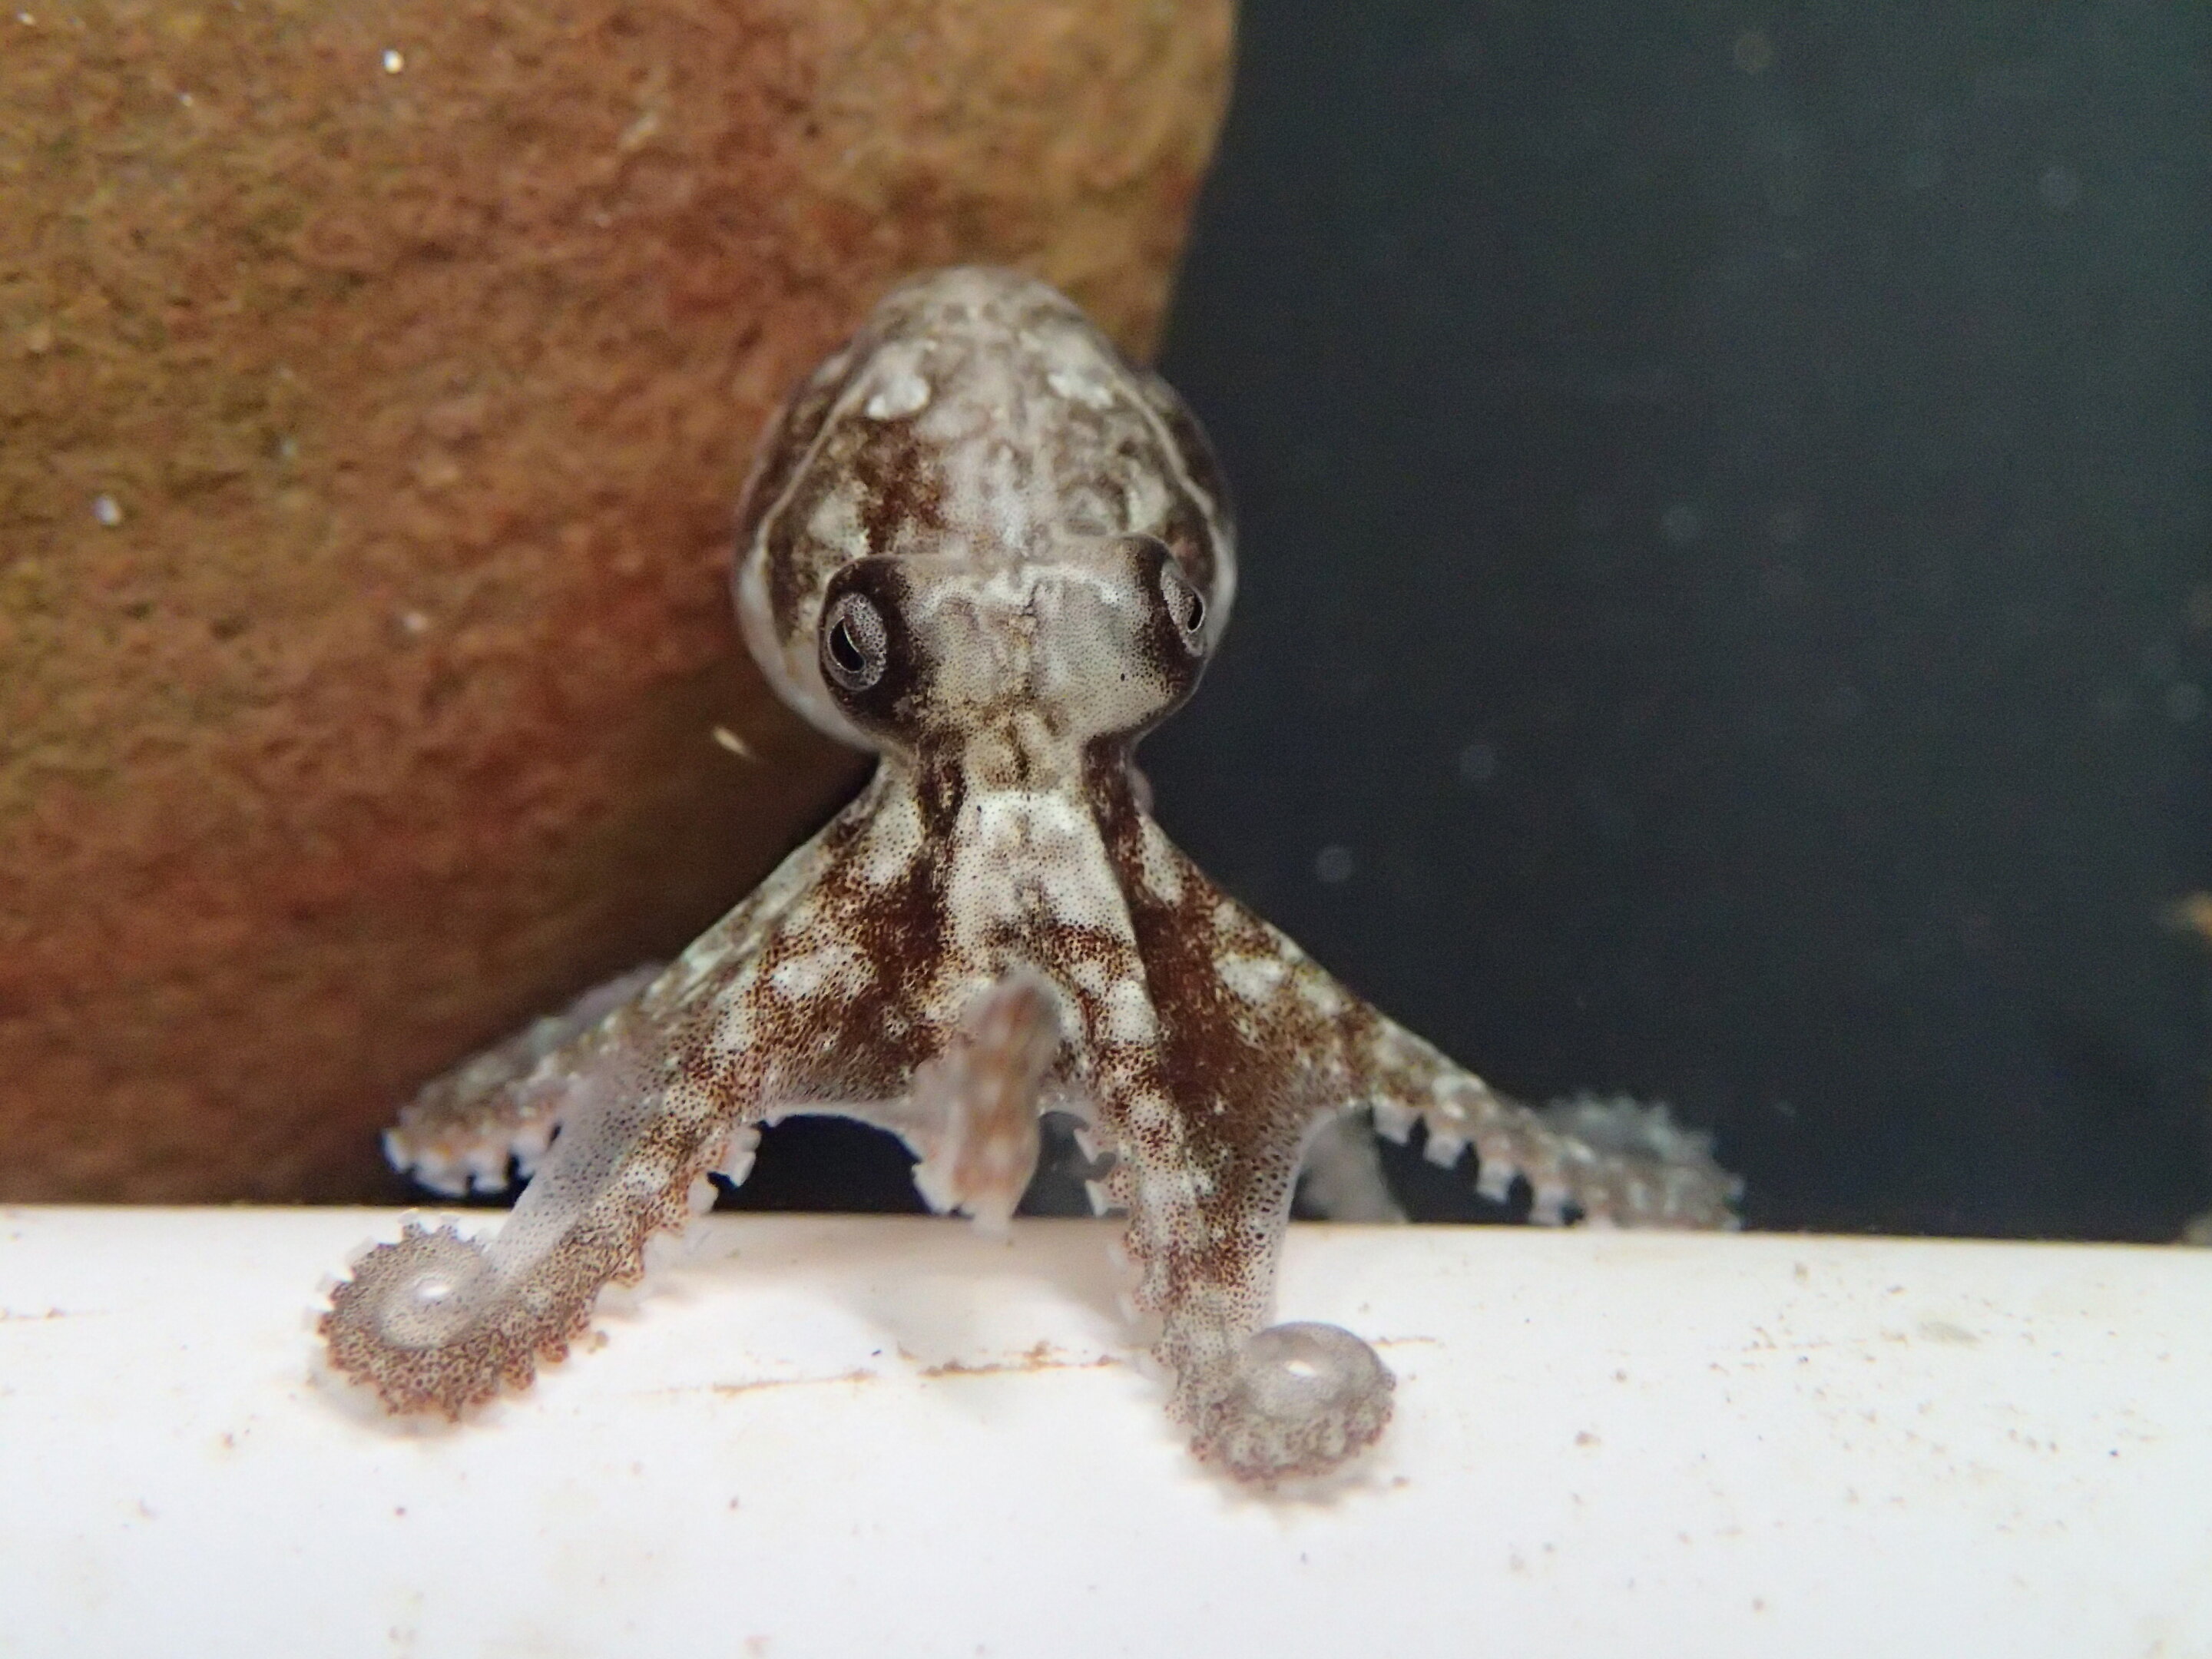 #Scientists create octopus survival guide to minimize impacts of fishing